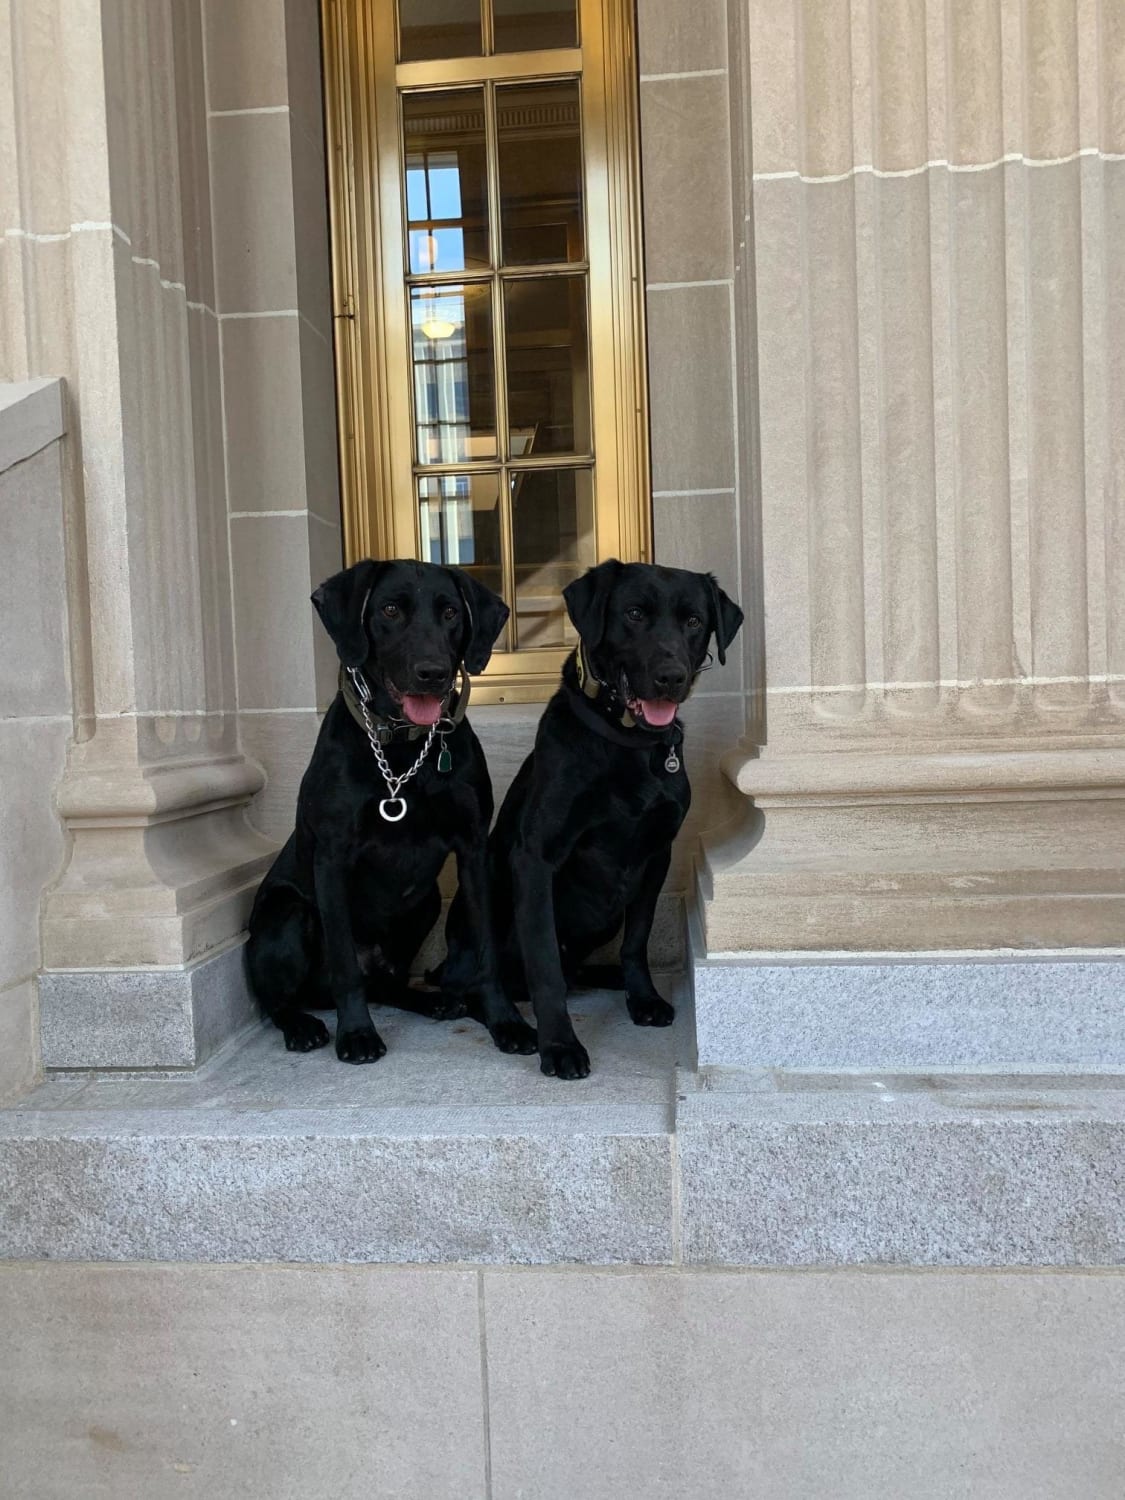 Wyoming State Patrol K9's Duster and Scout take a break from performing a sweep of the Wyoming Supreme Court for a Foreign dignitary for this great pic! Give a shout out to our Wyoming F.R.E.D. K9 Members!